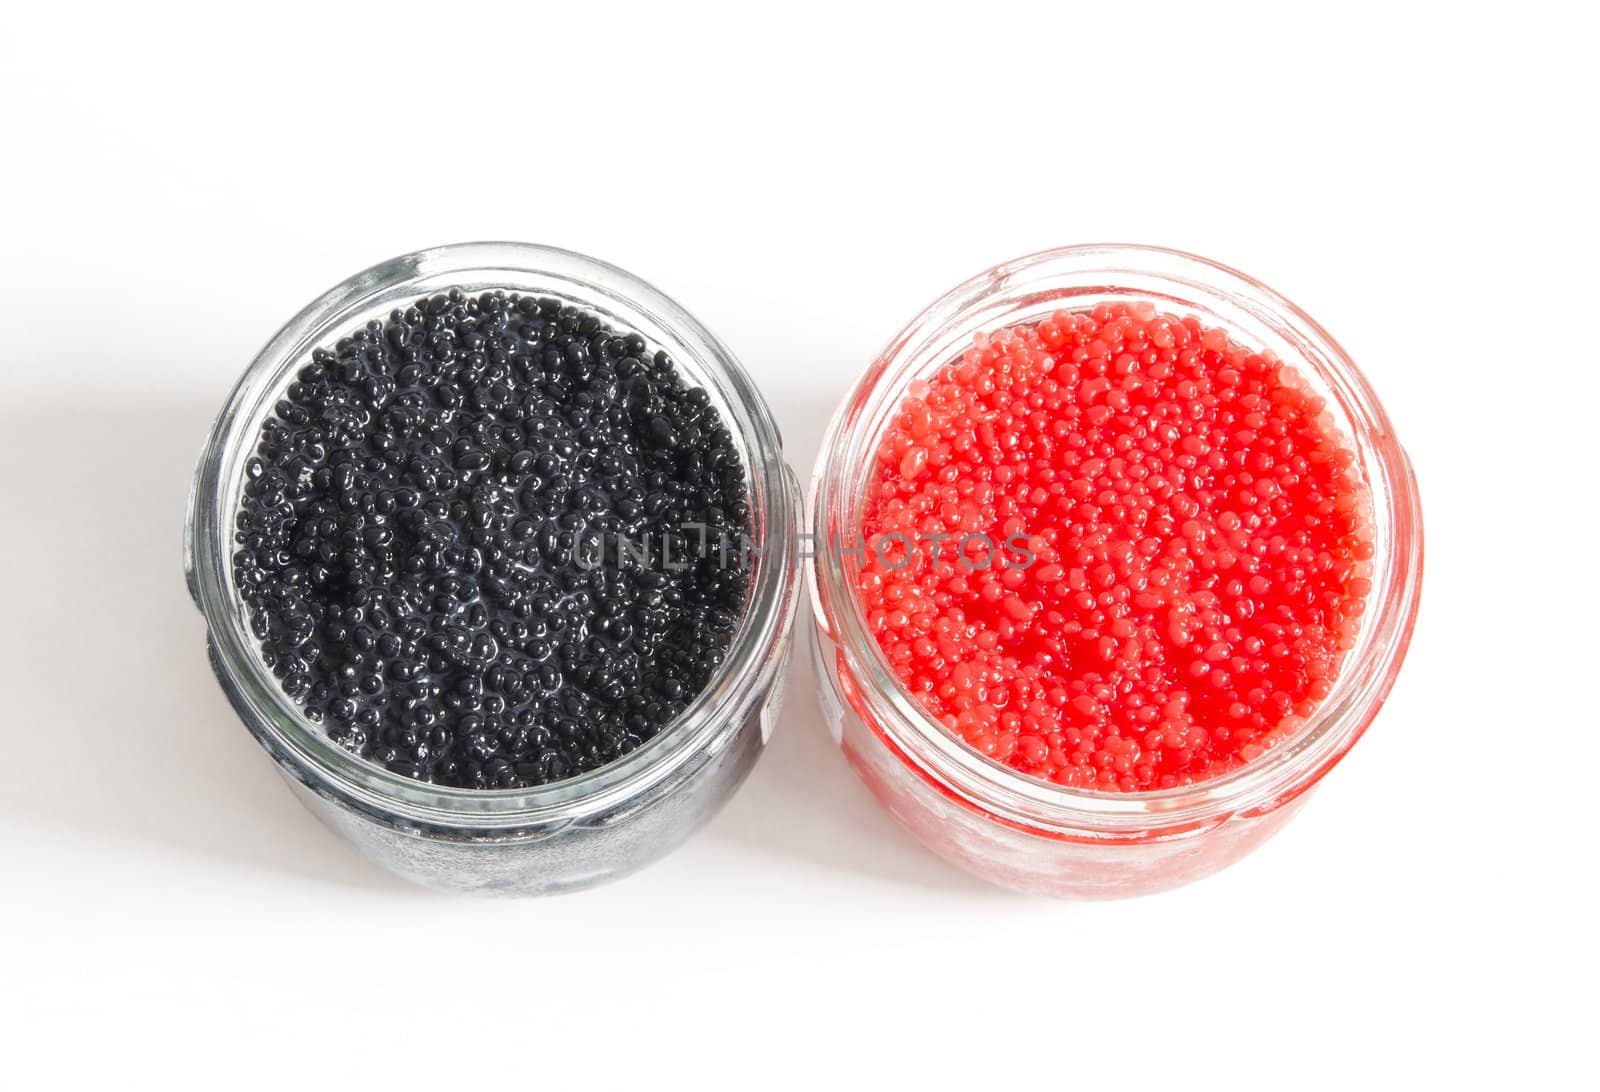 the red and black caviar in glass jars on withe background